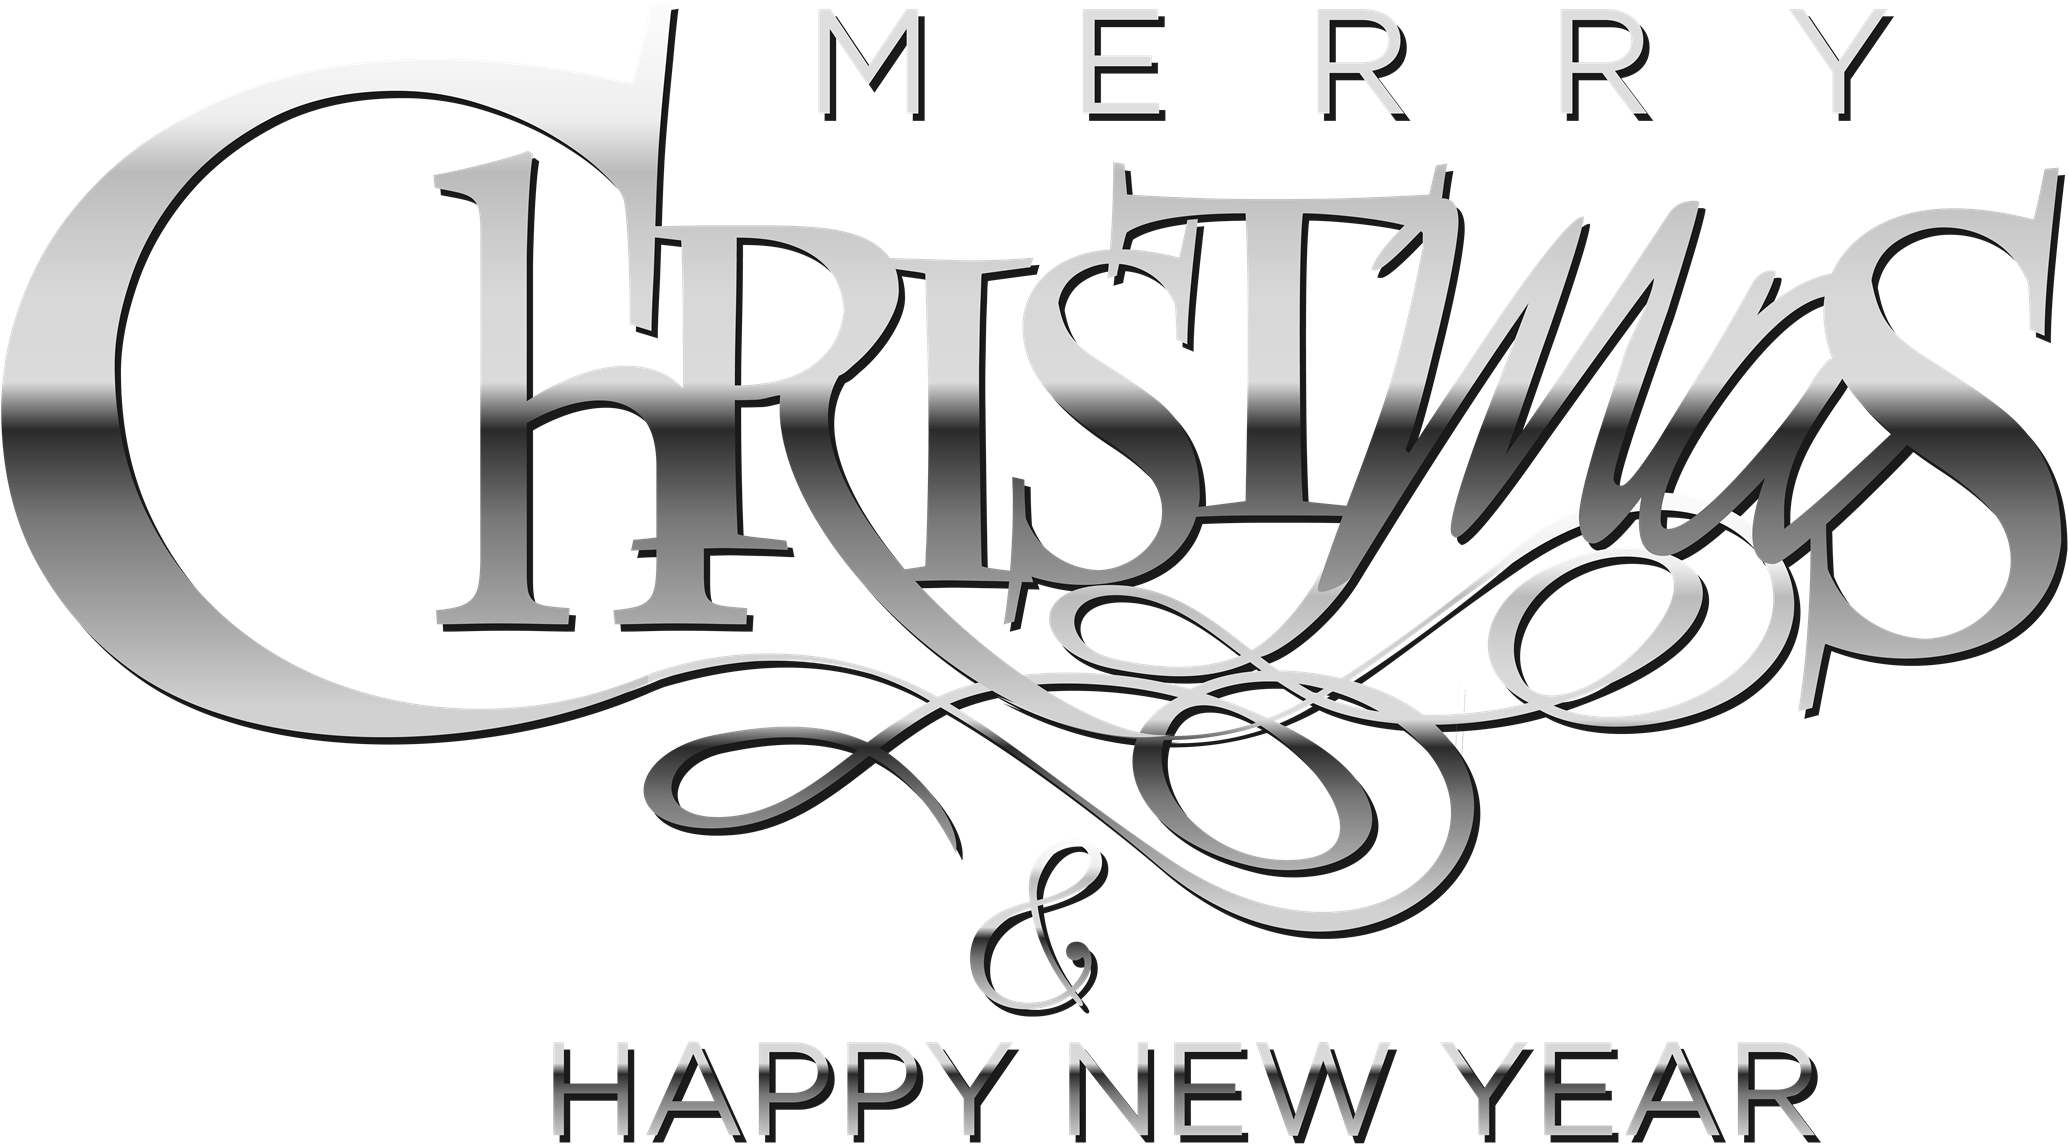 Merry Christmas Happy New Year Greeting PNG